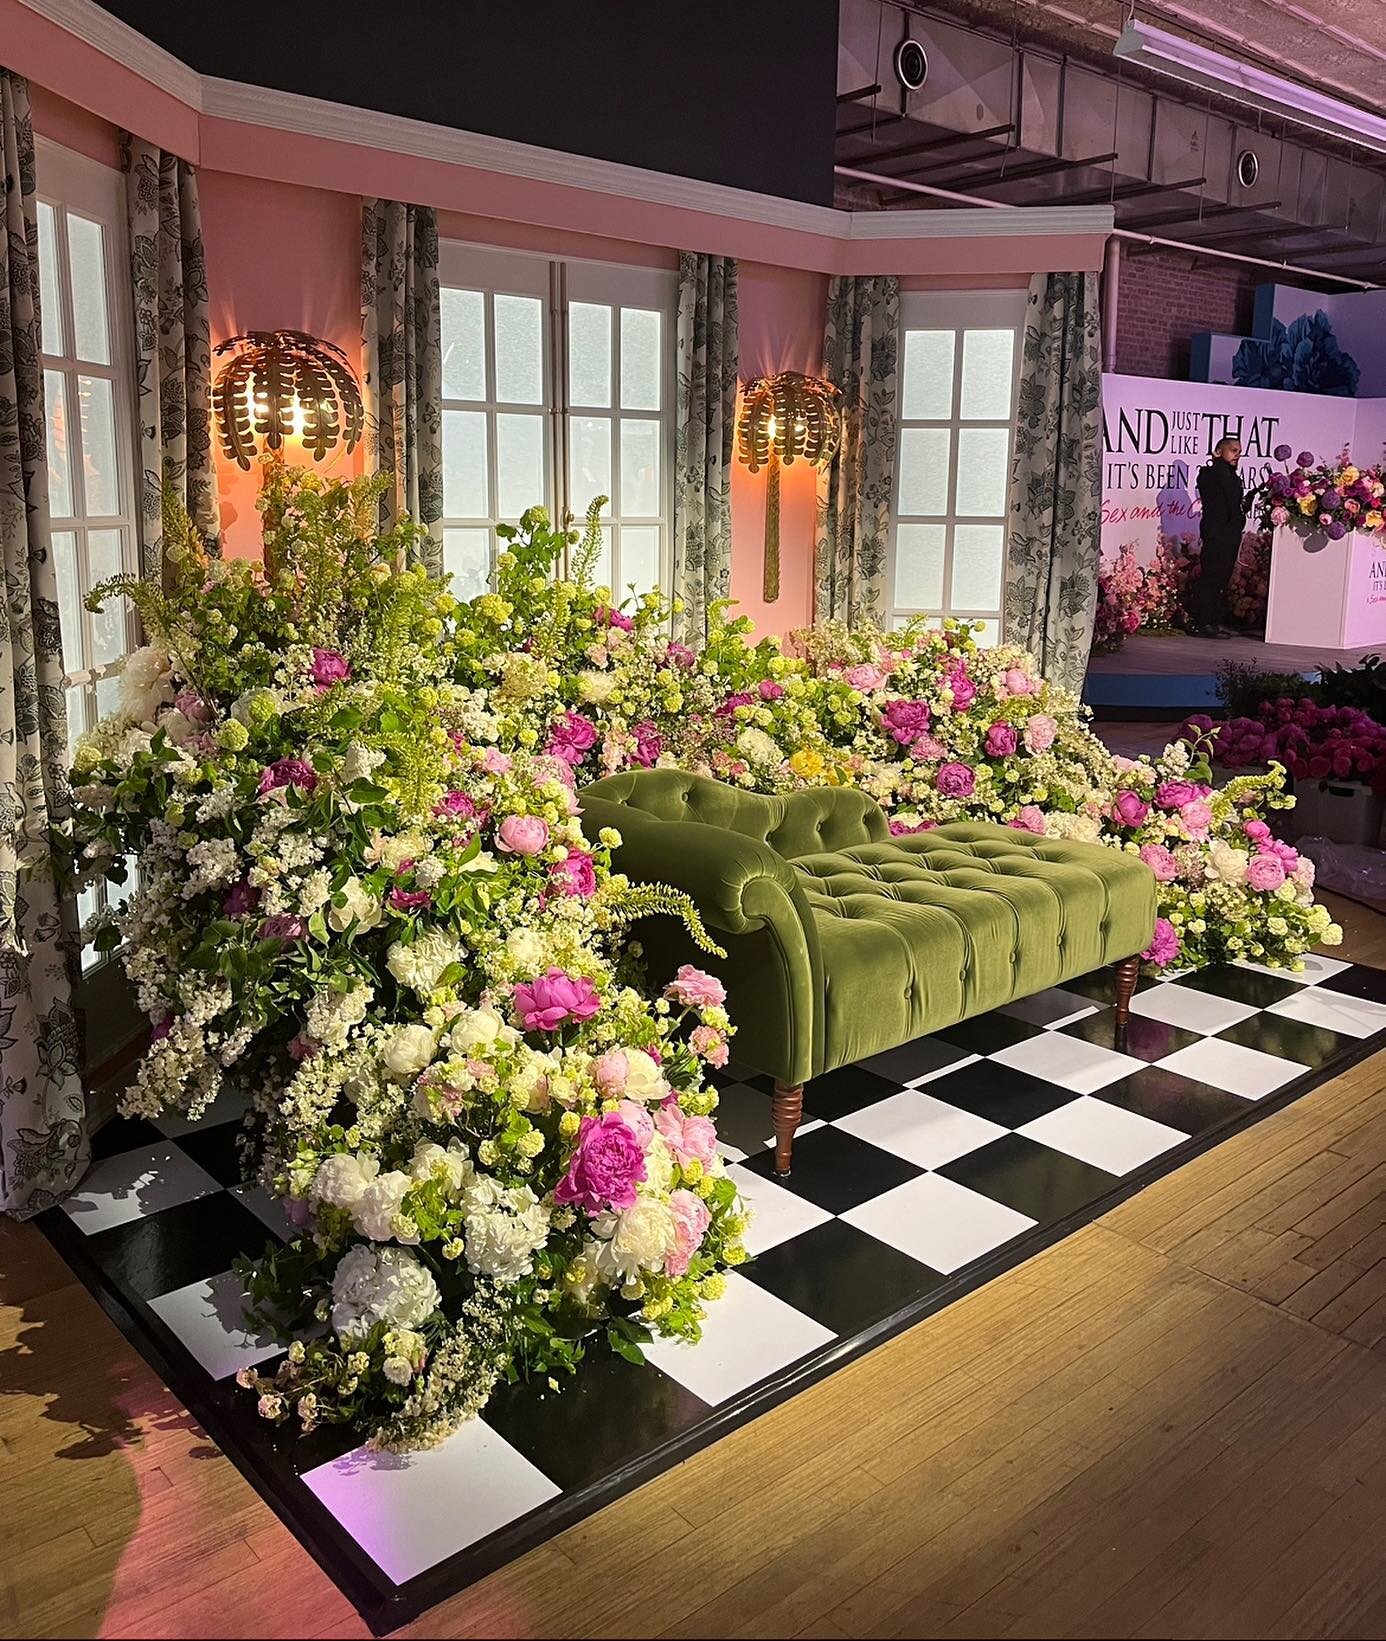 A fabulous photoshoot set for @vogue for the launch of the new season of #ajlt

#wedontjustdoflowers #custombuilt #photoset #eventdesign #eventproduction #vogue #weloveourjob #concepttocompletion